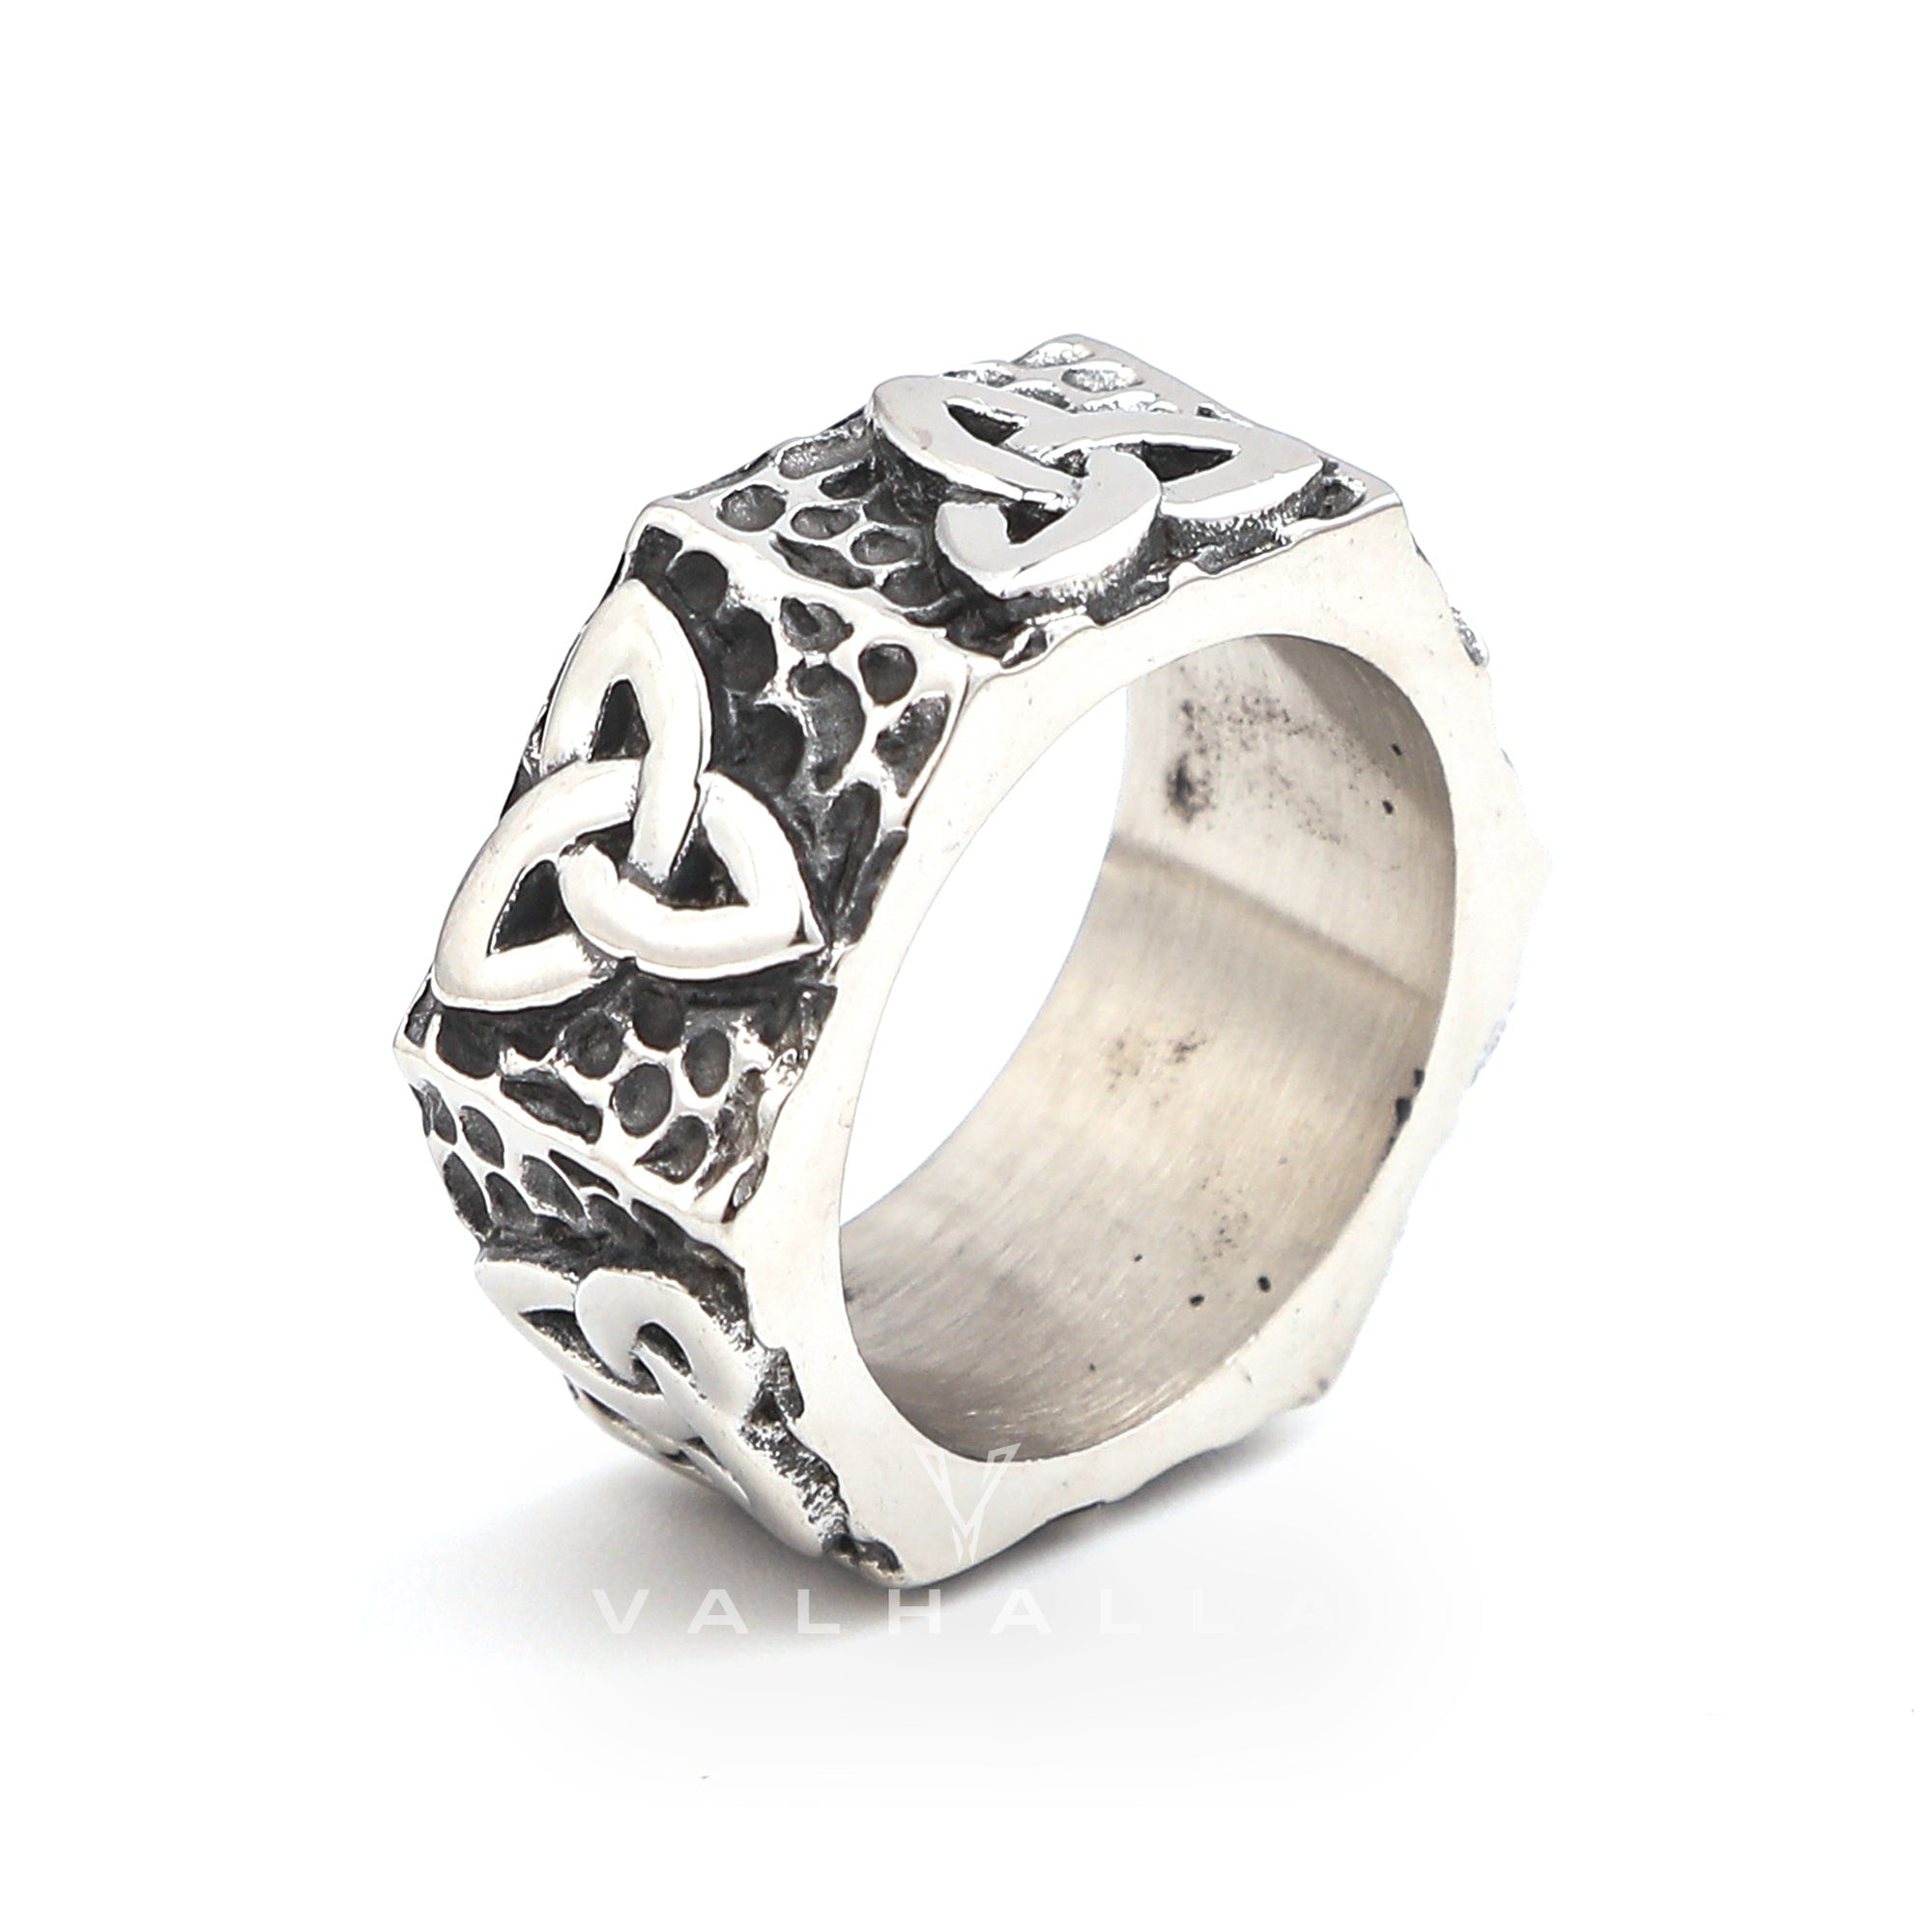 Hexagonal Handcrafted Stainless Steel Triquetra Ring